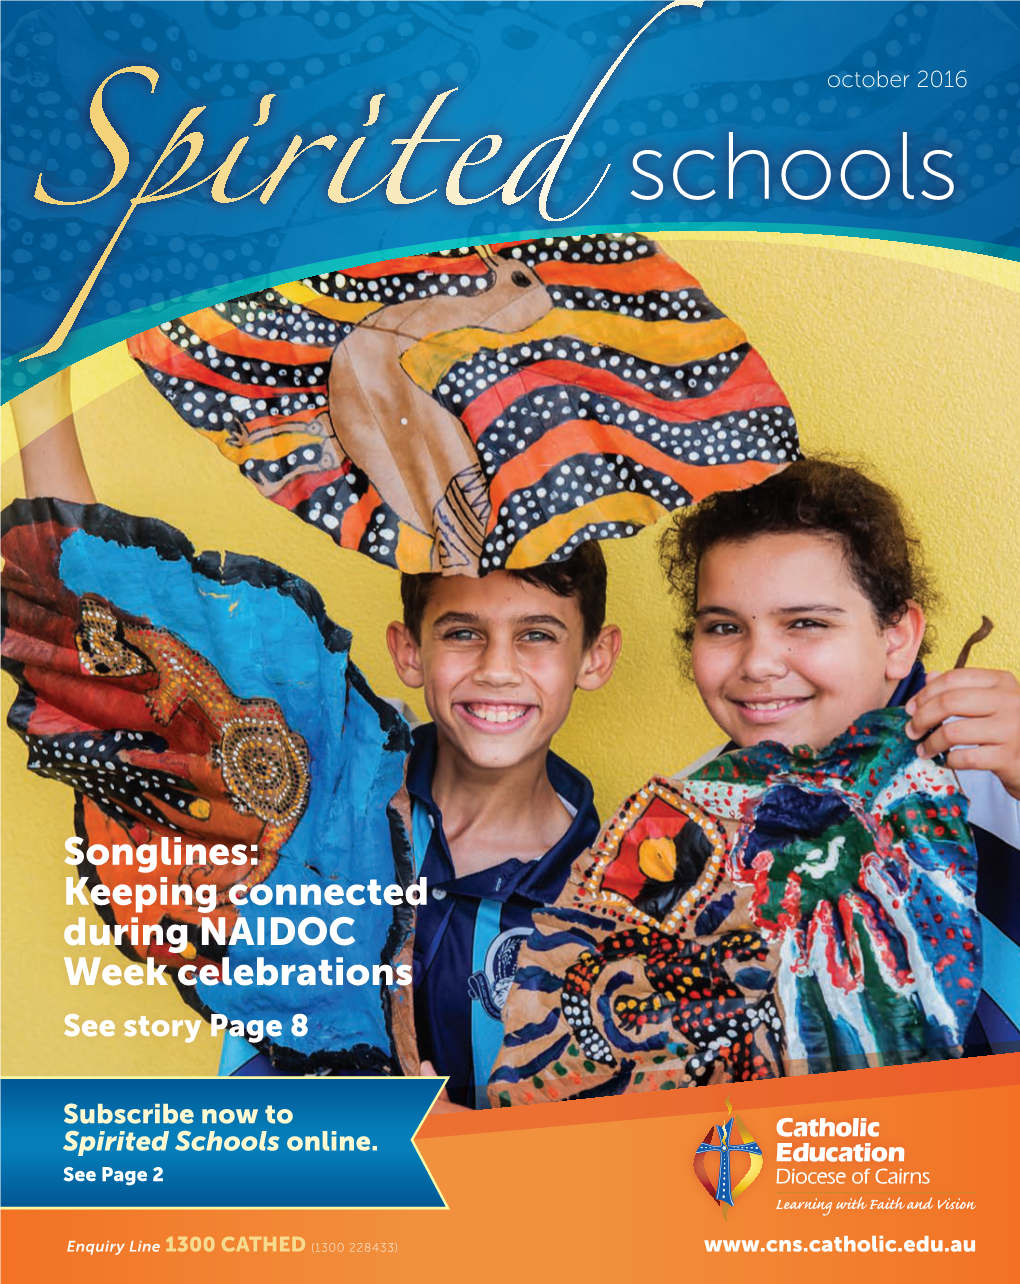 Songlines: Keeping Connected During NAIDOC Week Celebrations See Story Page 8